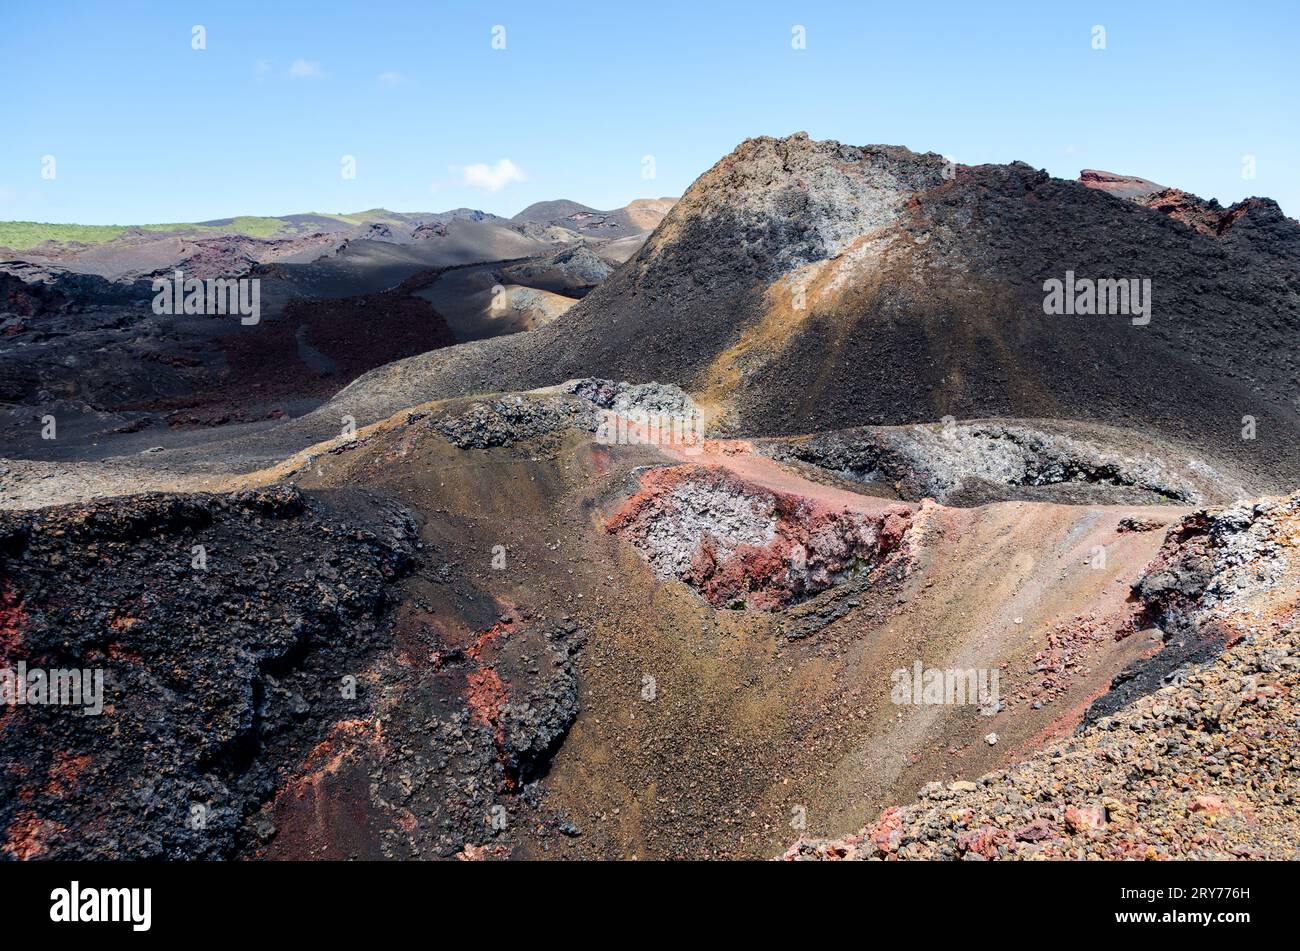 amazing volcanic landscape in galapagos islands Stock Photo